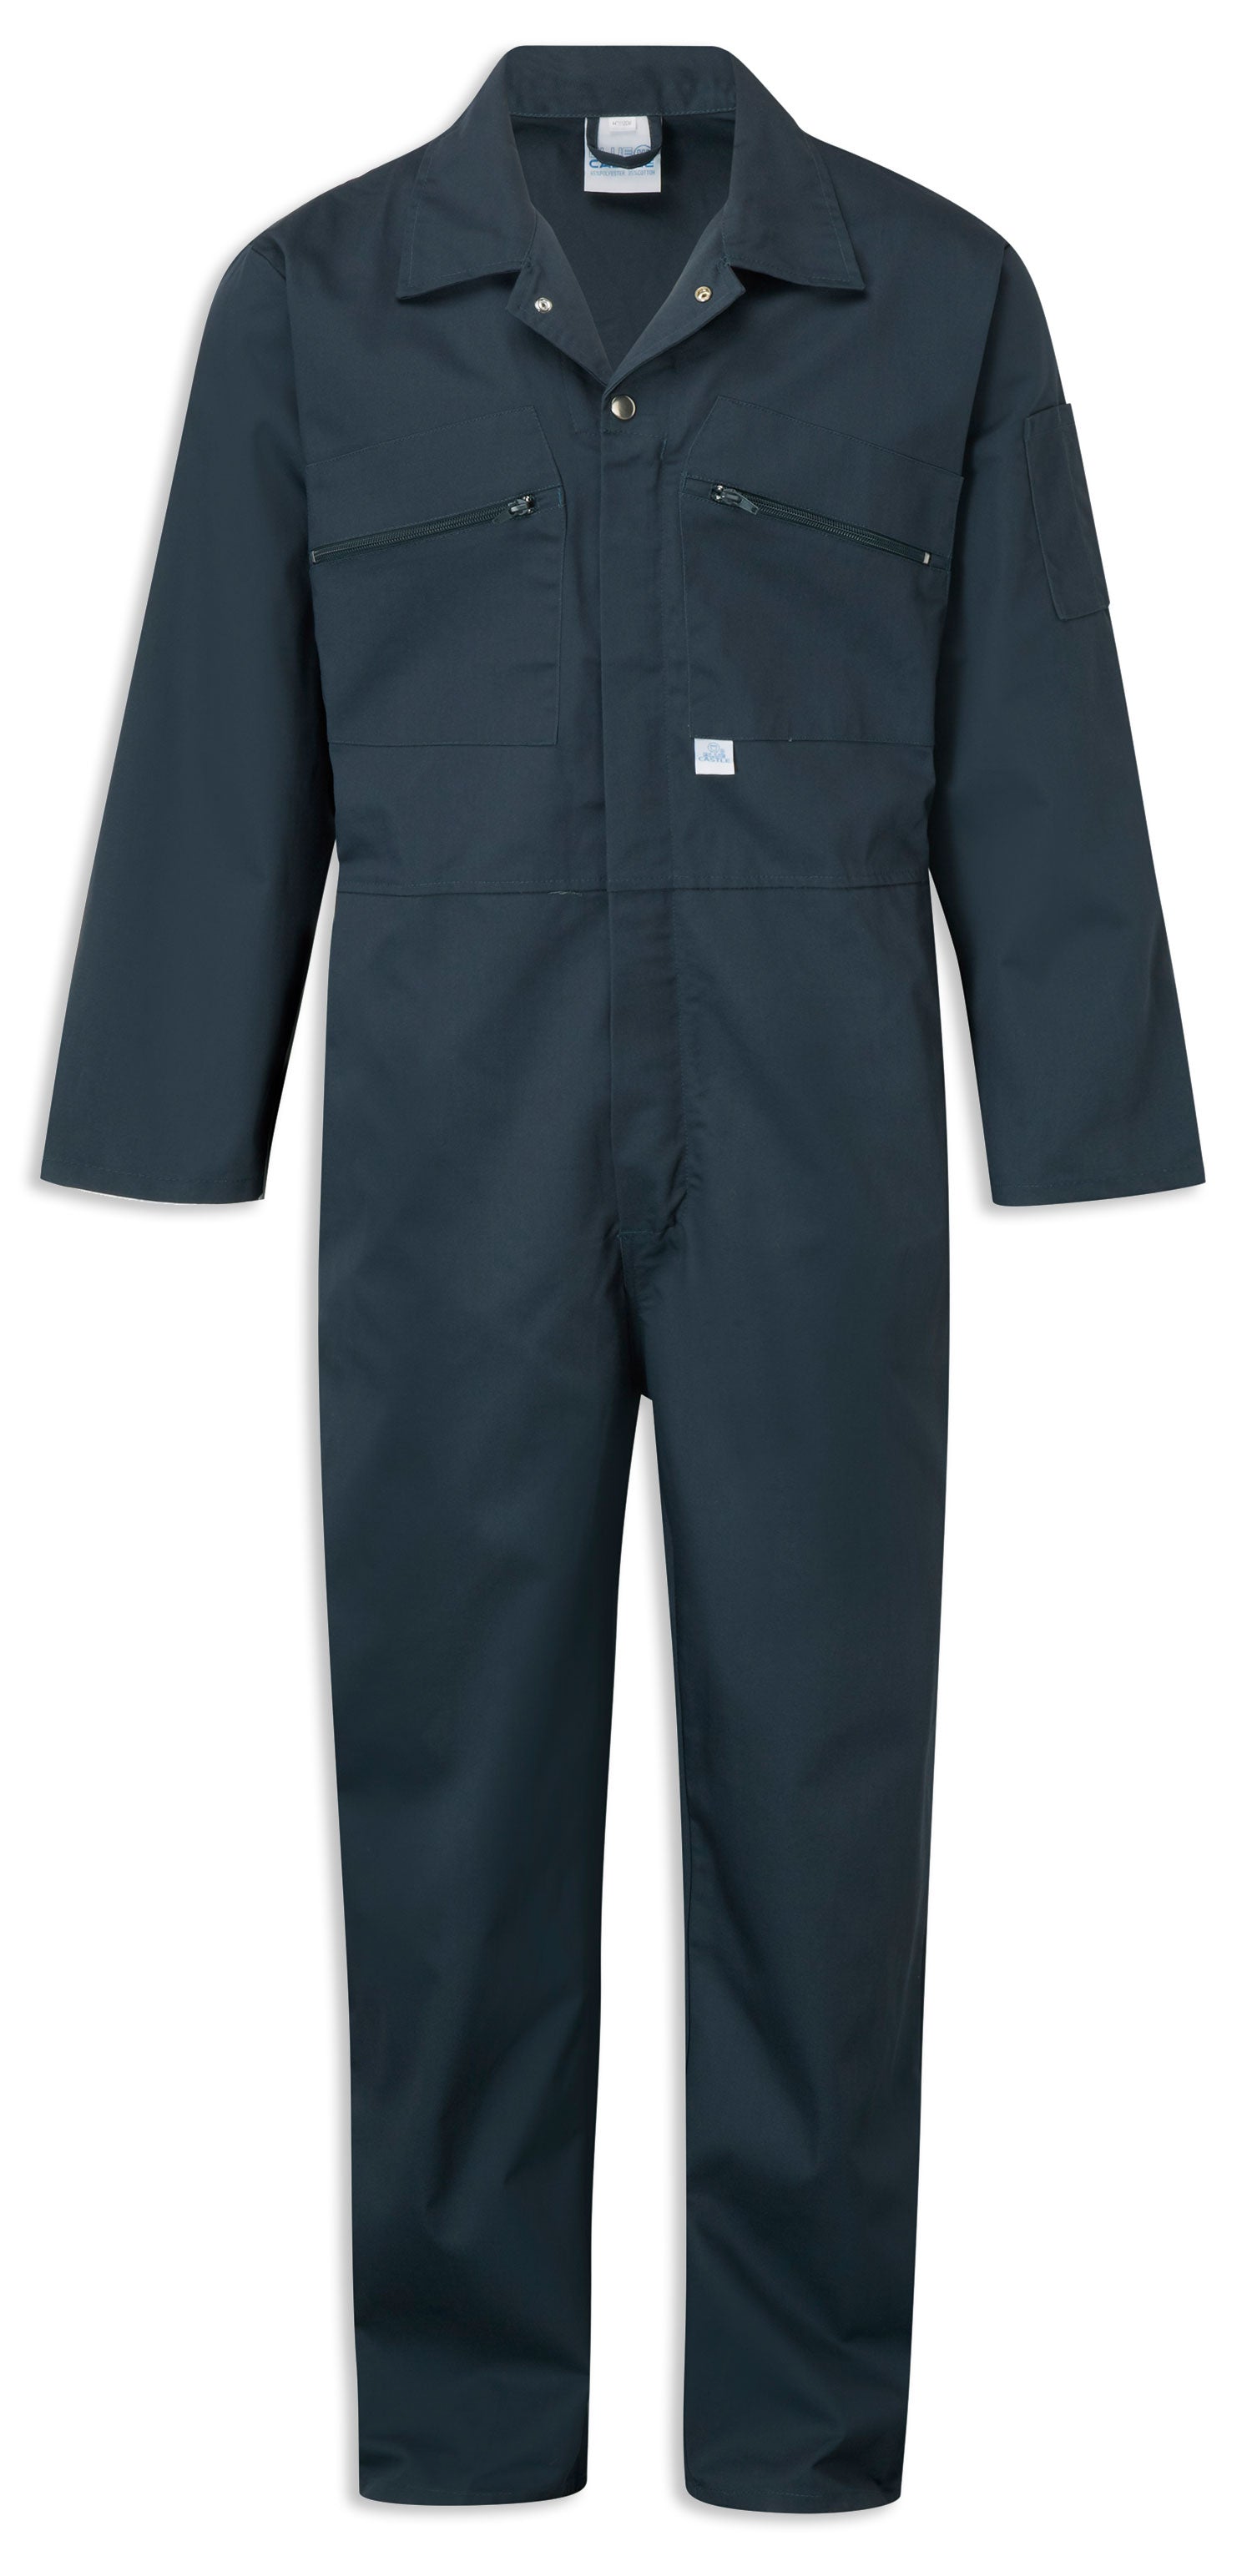 Spruce Green Fort Polycotton Zip Fastening Overalls by Castle